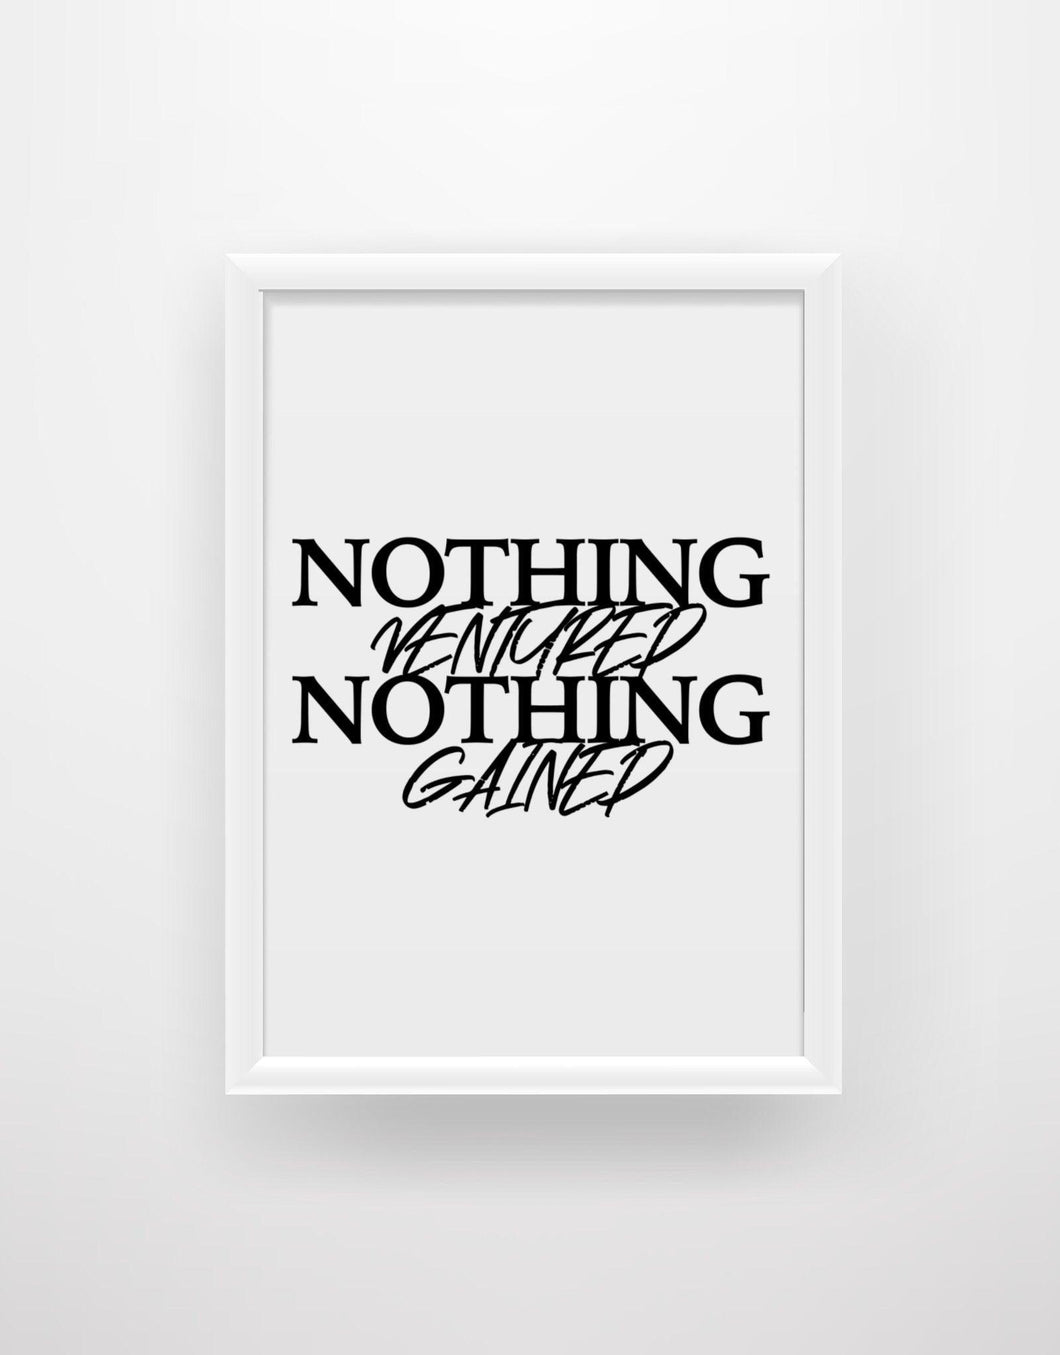 Nothing Ventured Nothing Gained - Motivational Quote Print - Chic Prints